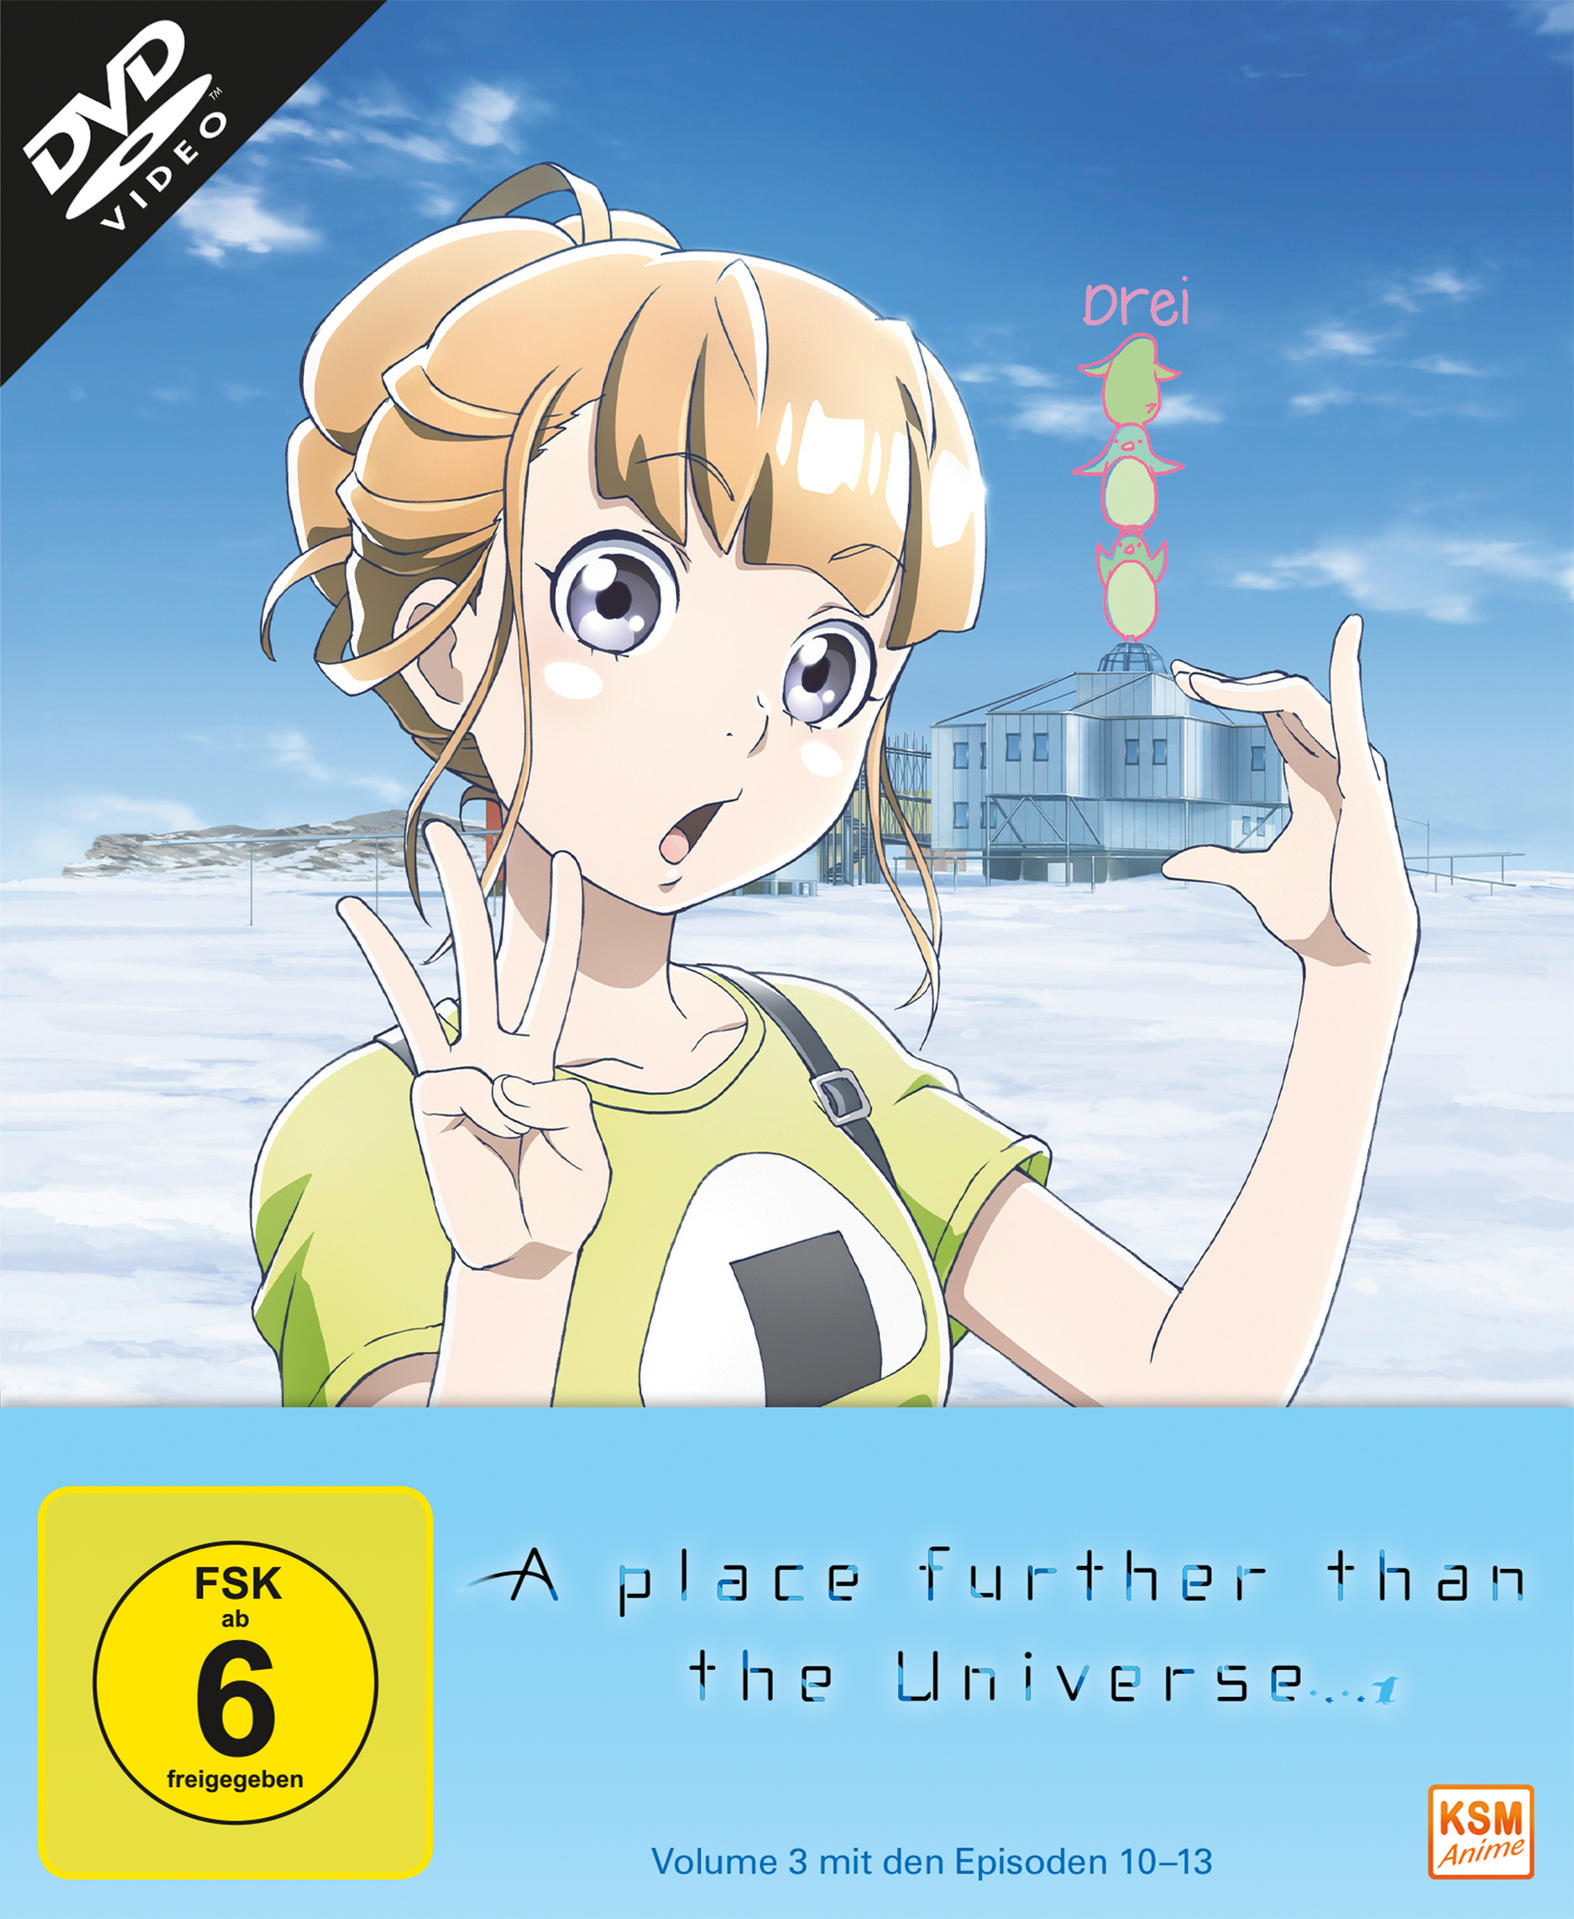 The DVD (Episode 3 10-13) Place Further Universe Volume - A Than